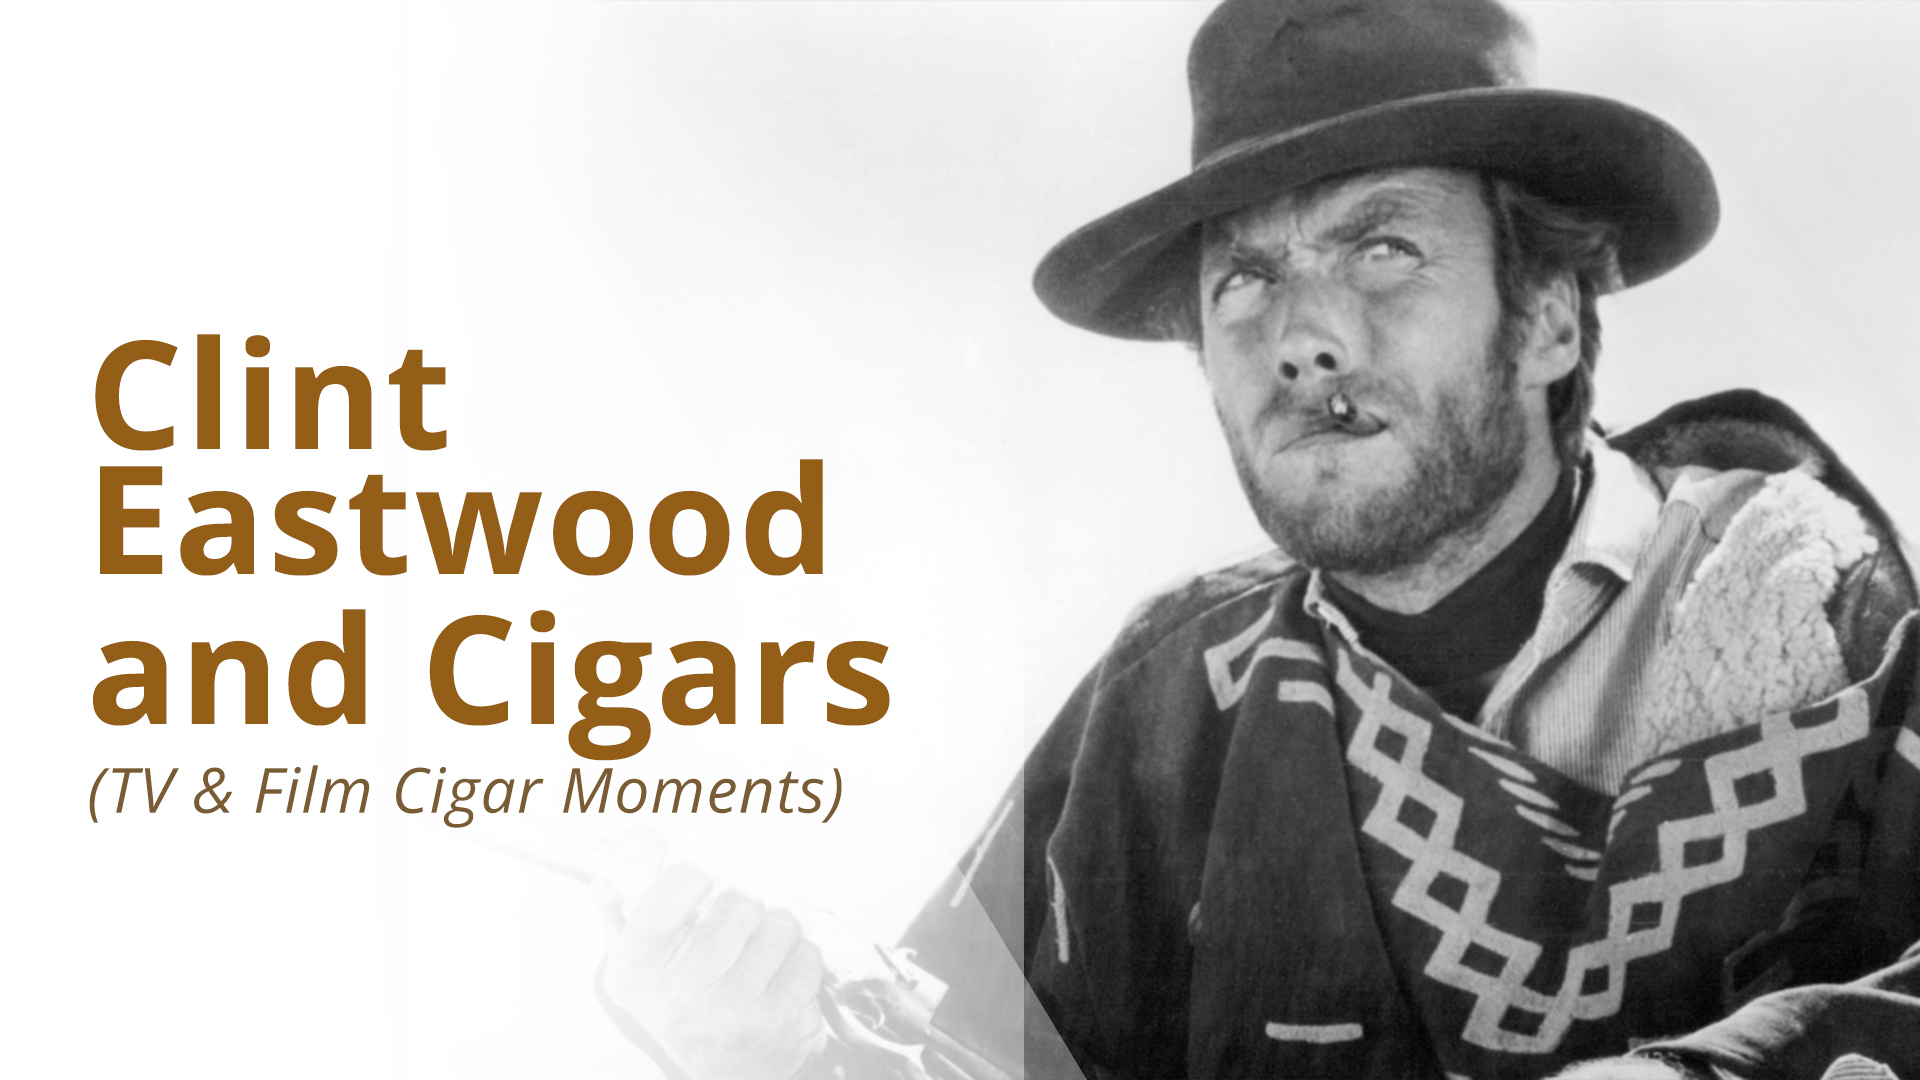 What cigars did Clint Eastwood smoke